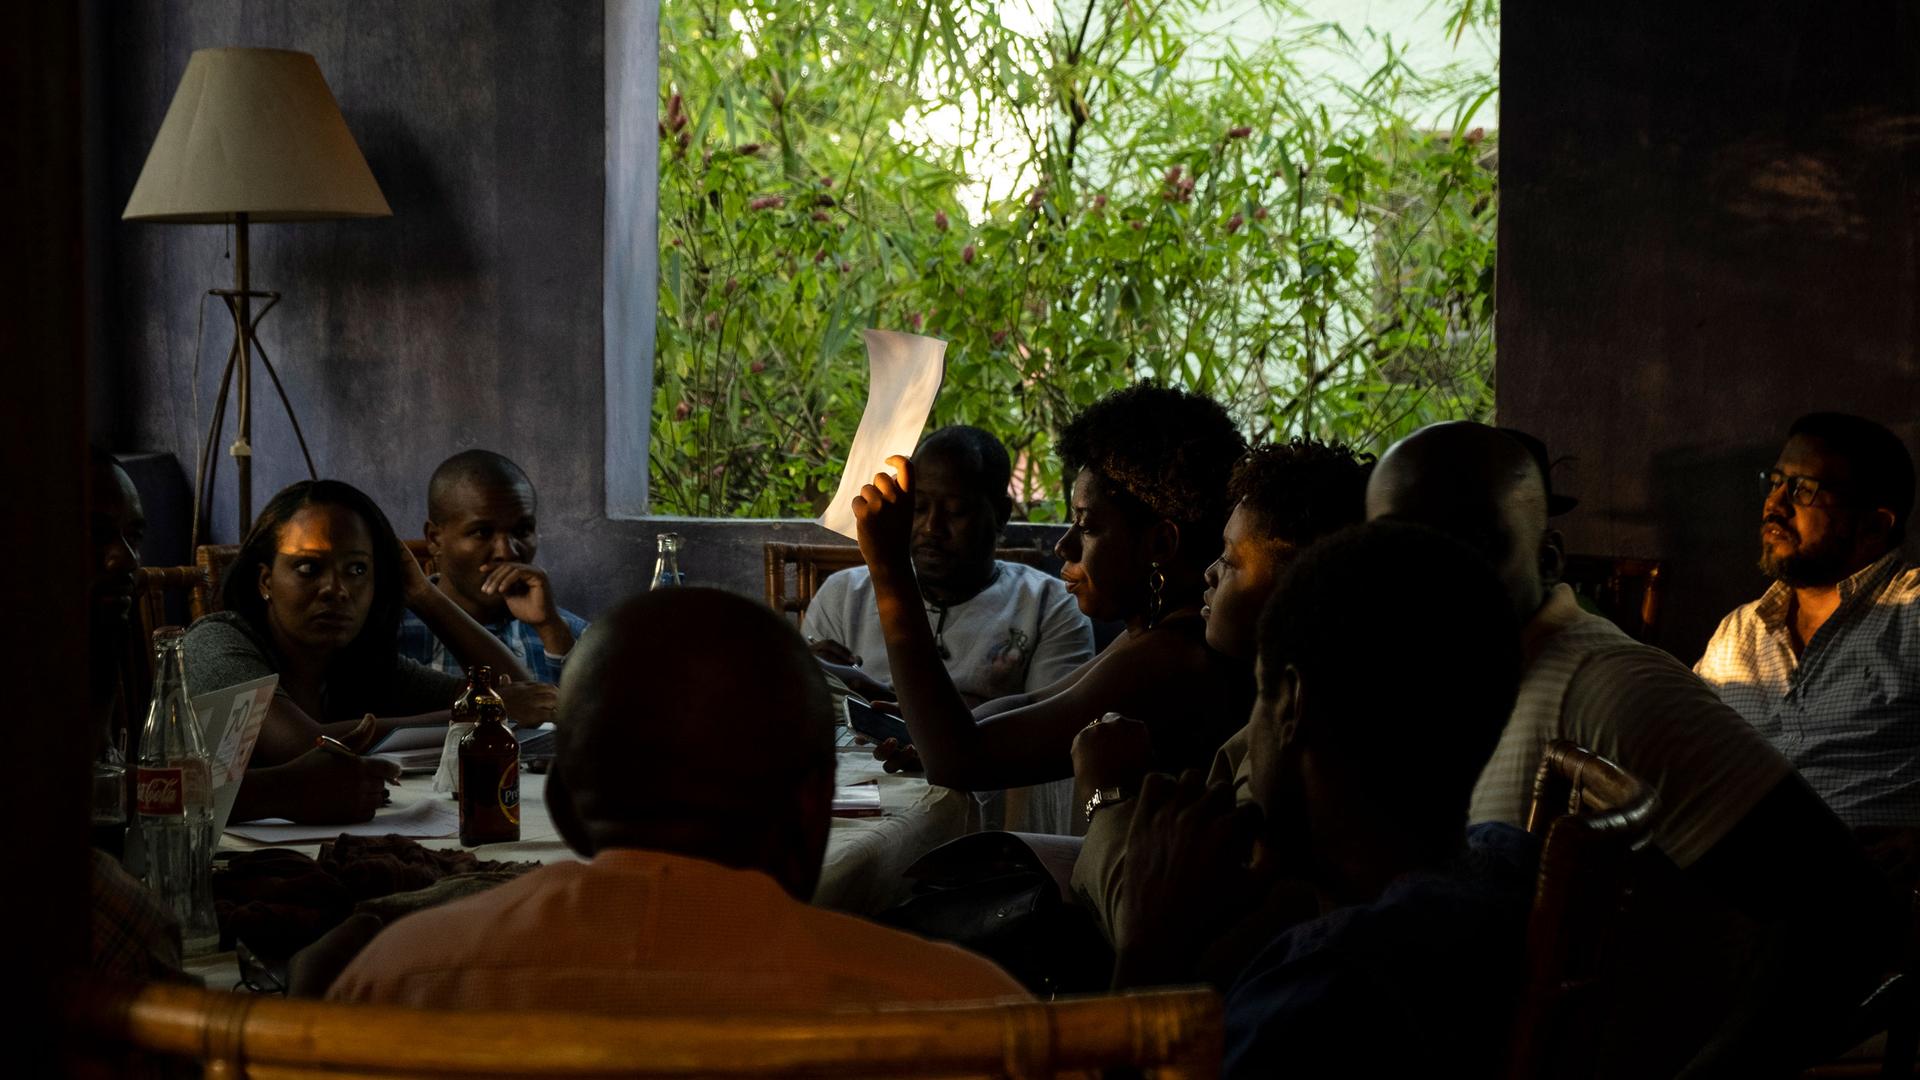 A group of young Haitians are shown sitting around a table in a room without glass in the windows.